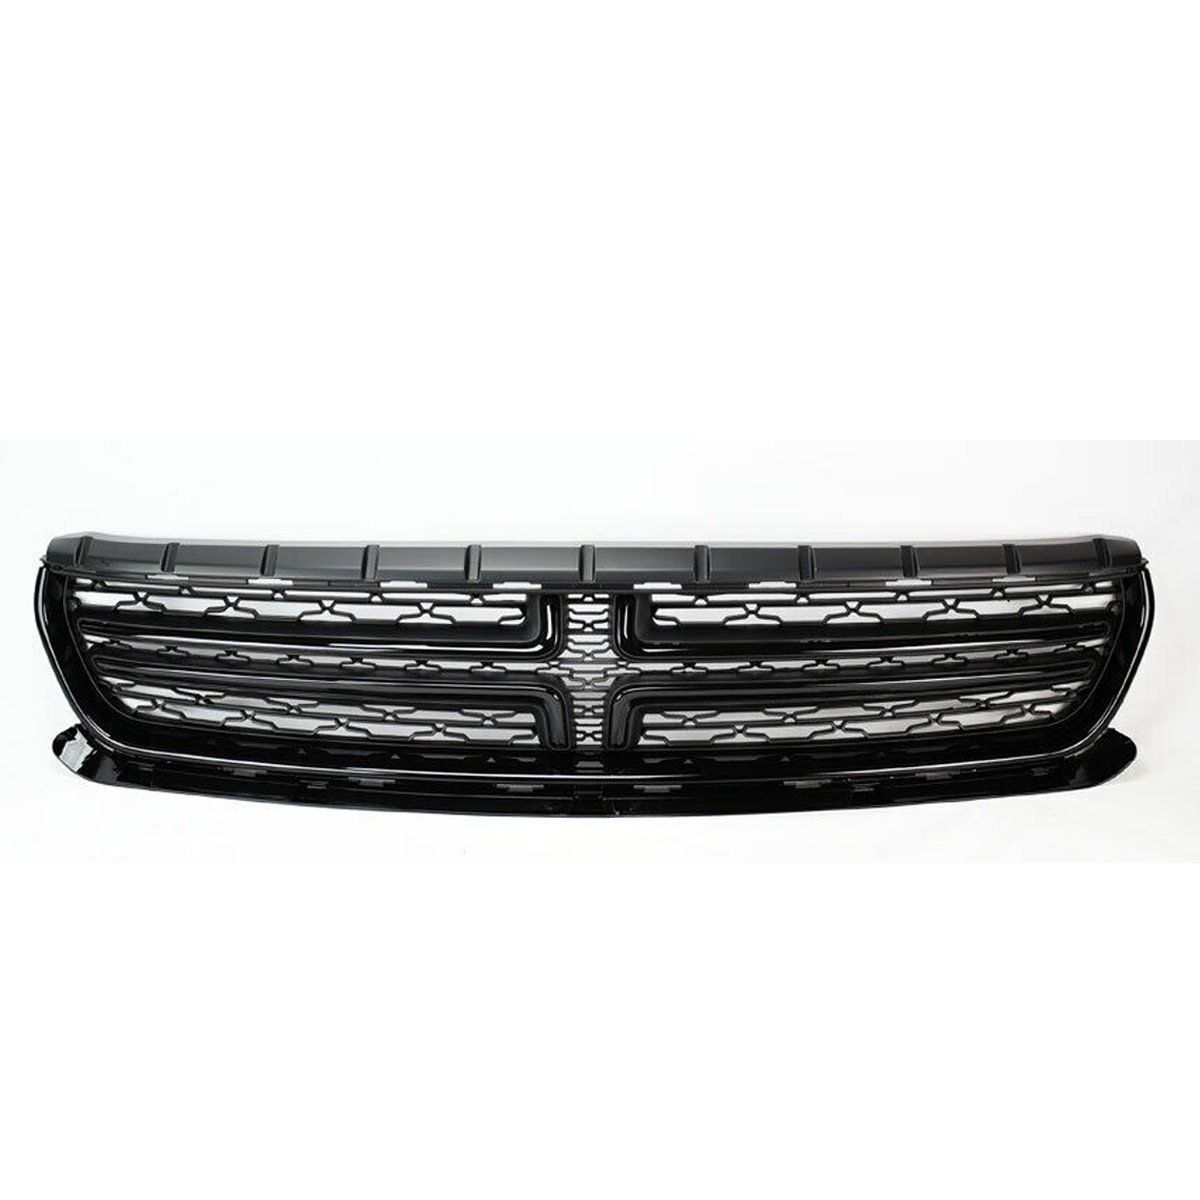 

Glossy Black ABS Front Upper Bumper Grill Grille For Dodge Charger 2015-2018